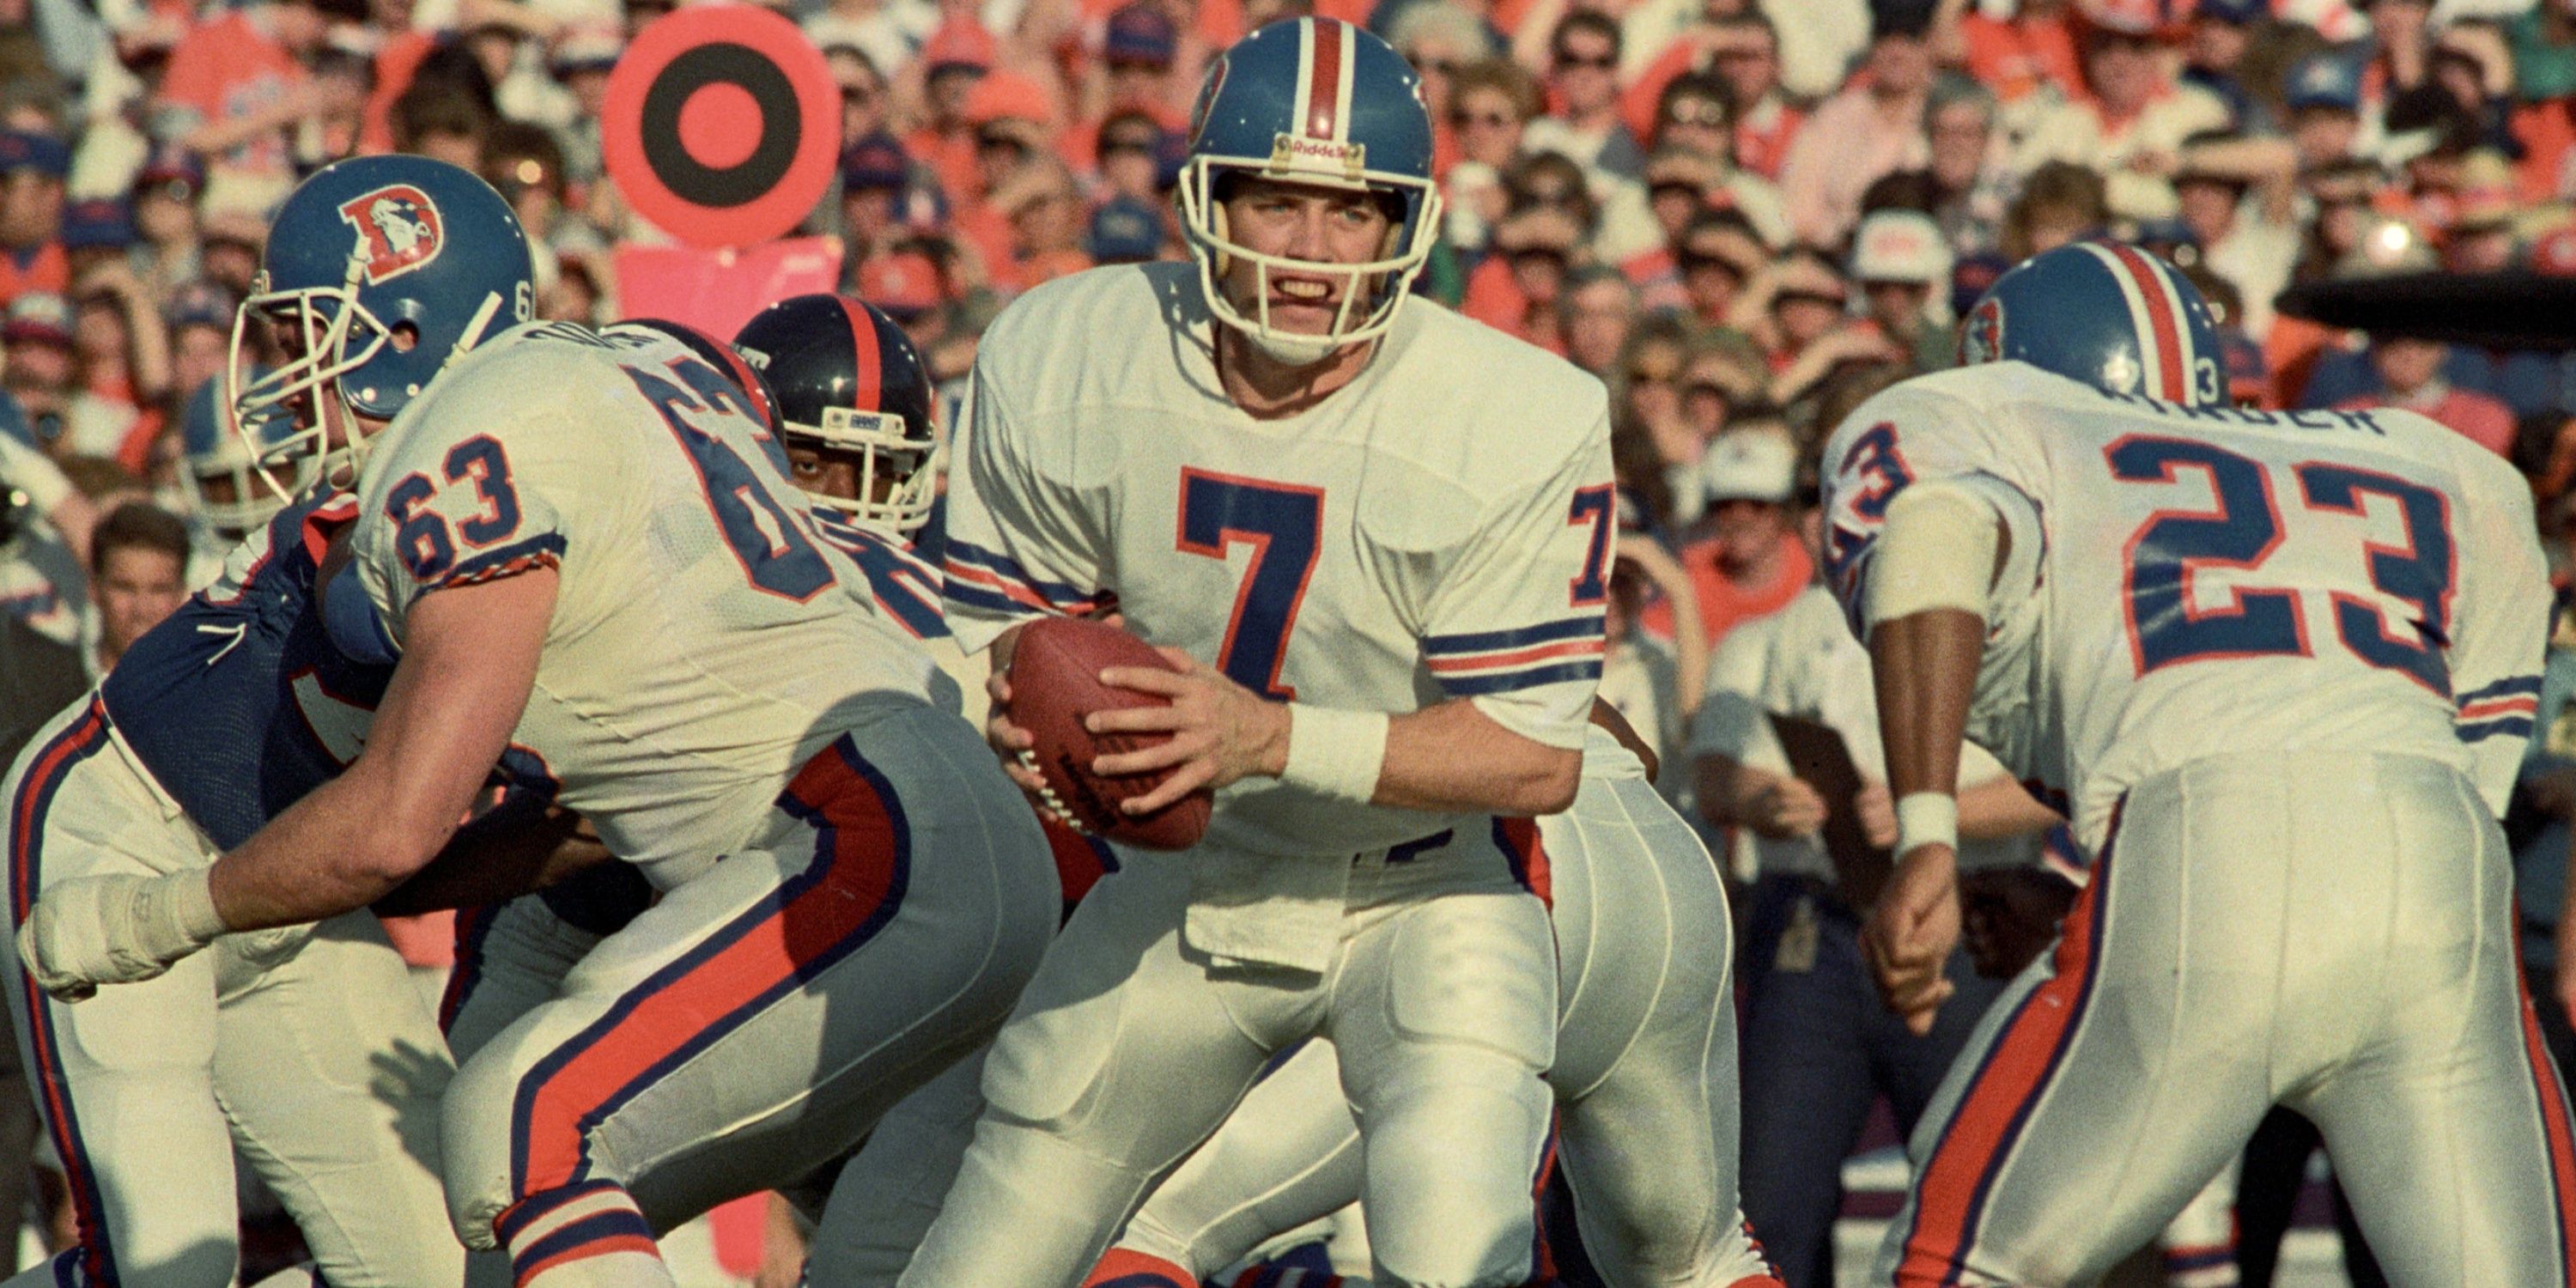 John Elway drops back during a 1980s NFL game